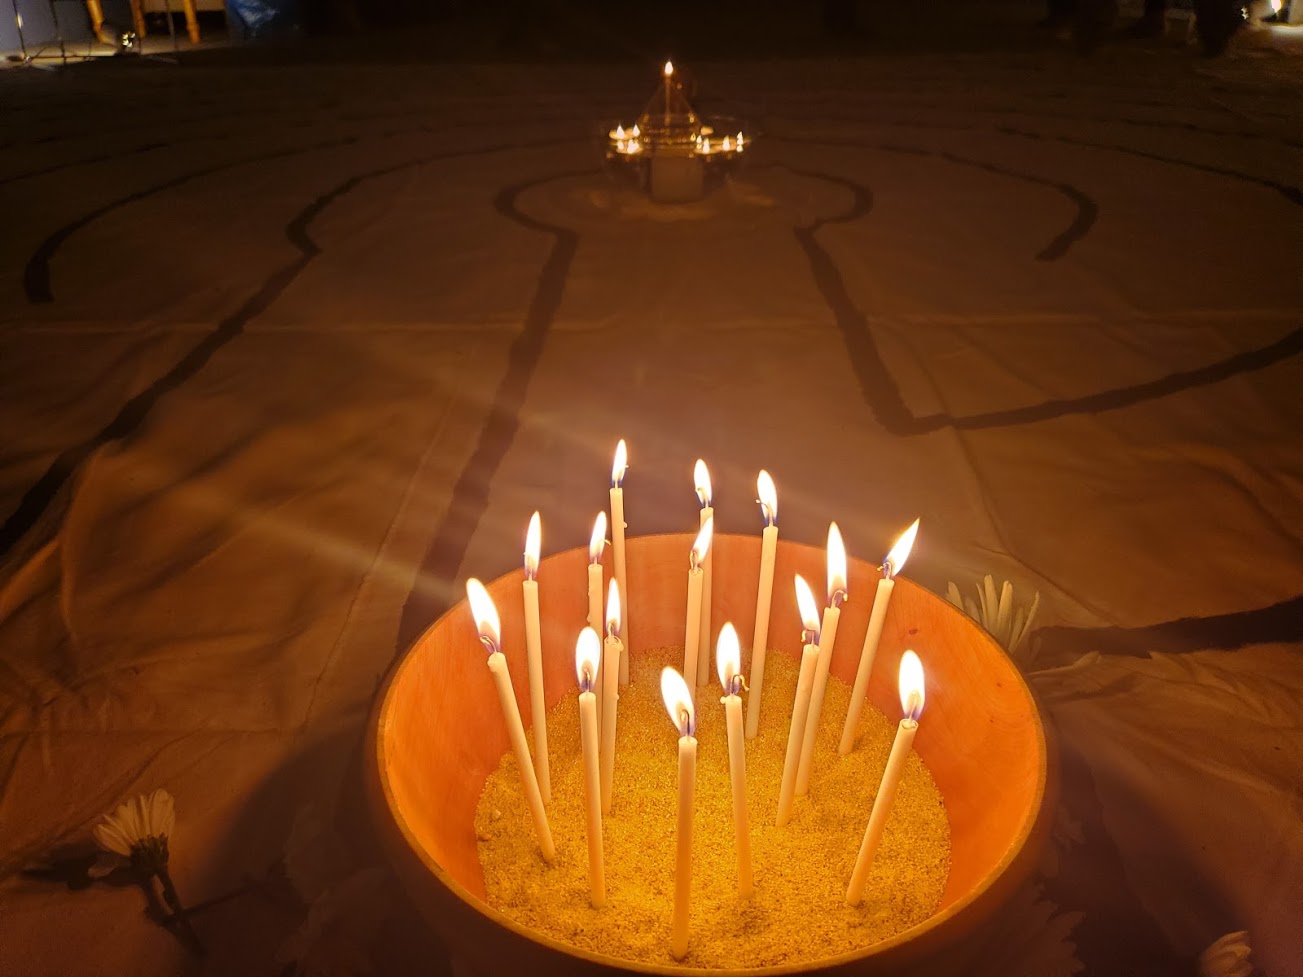 Lit candles in a bowl